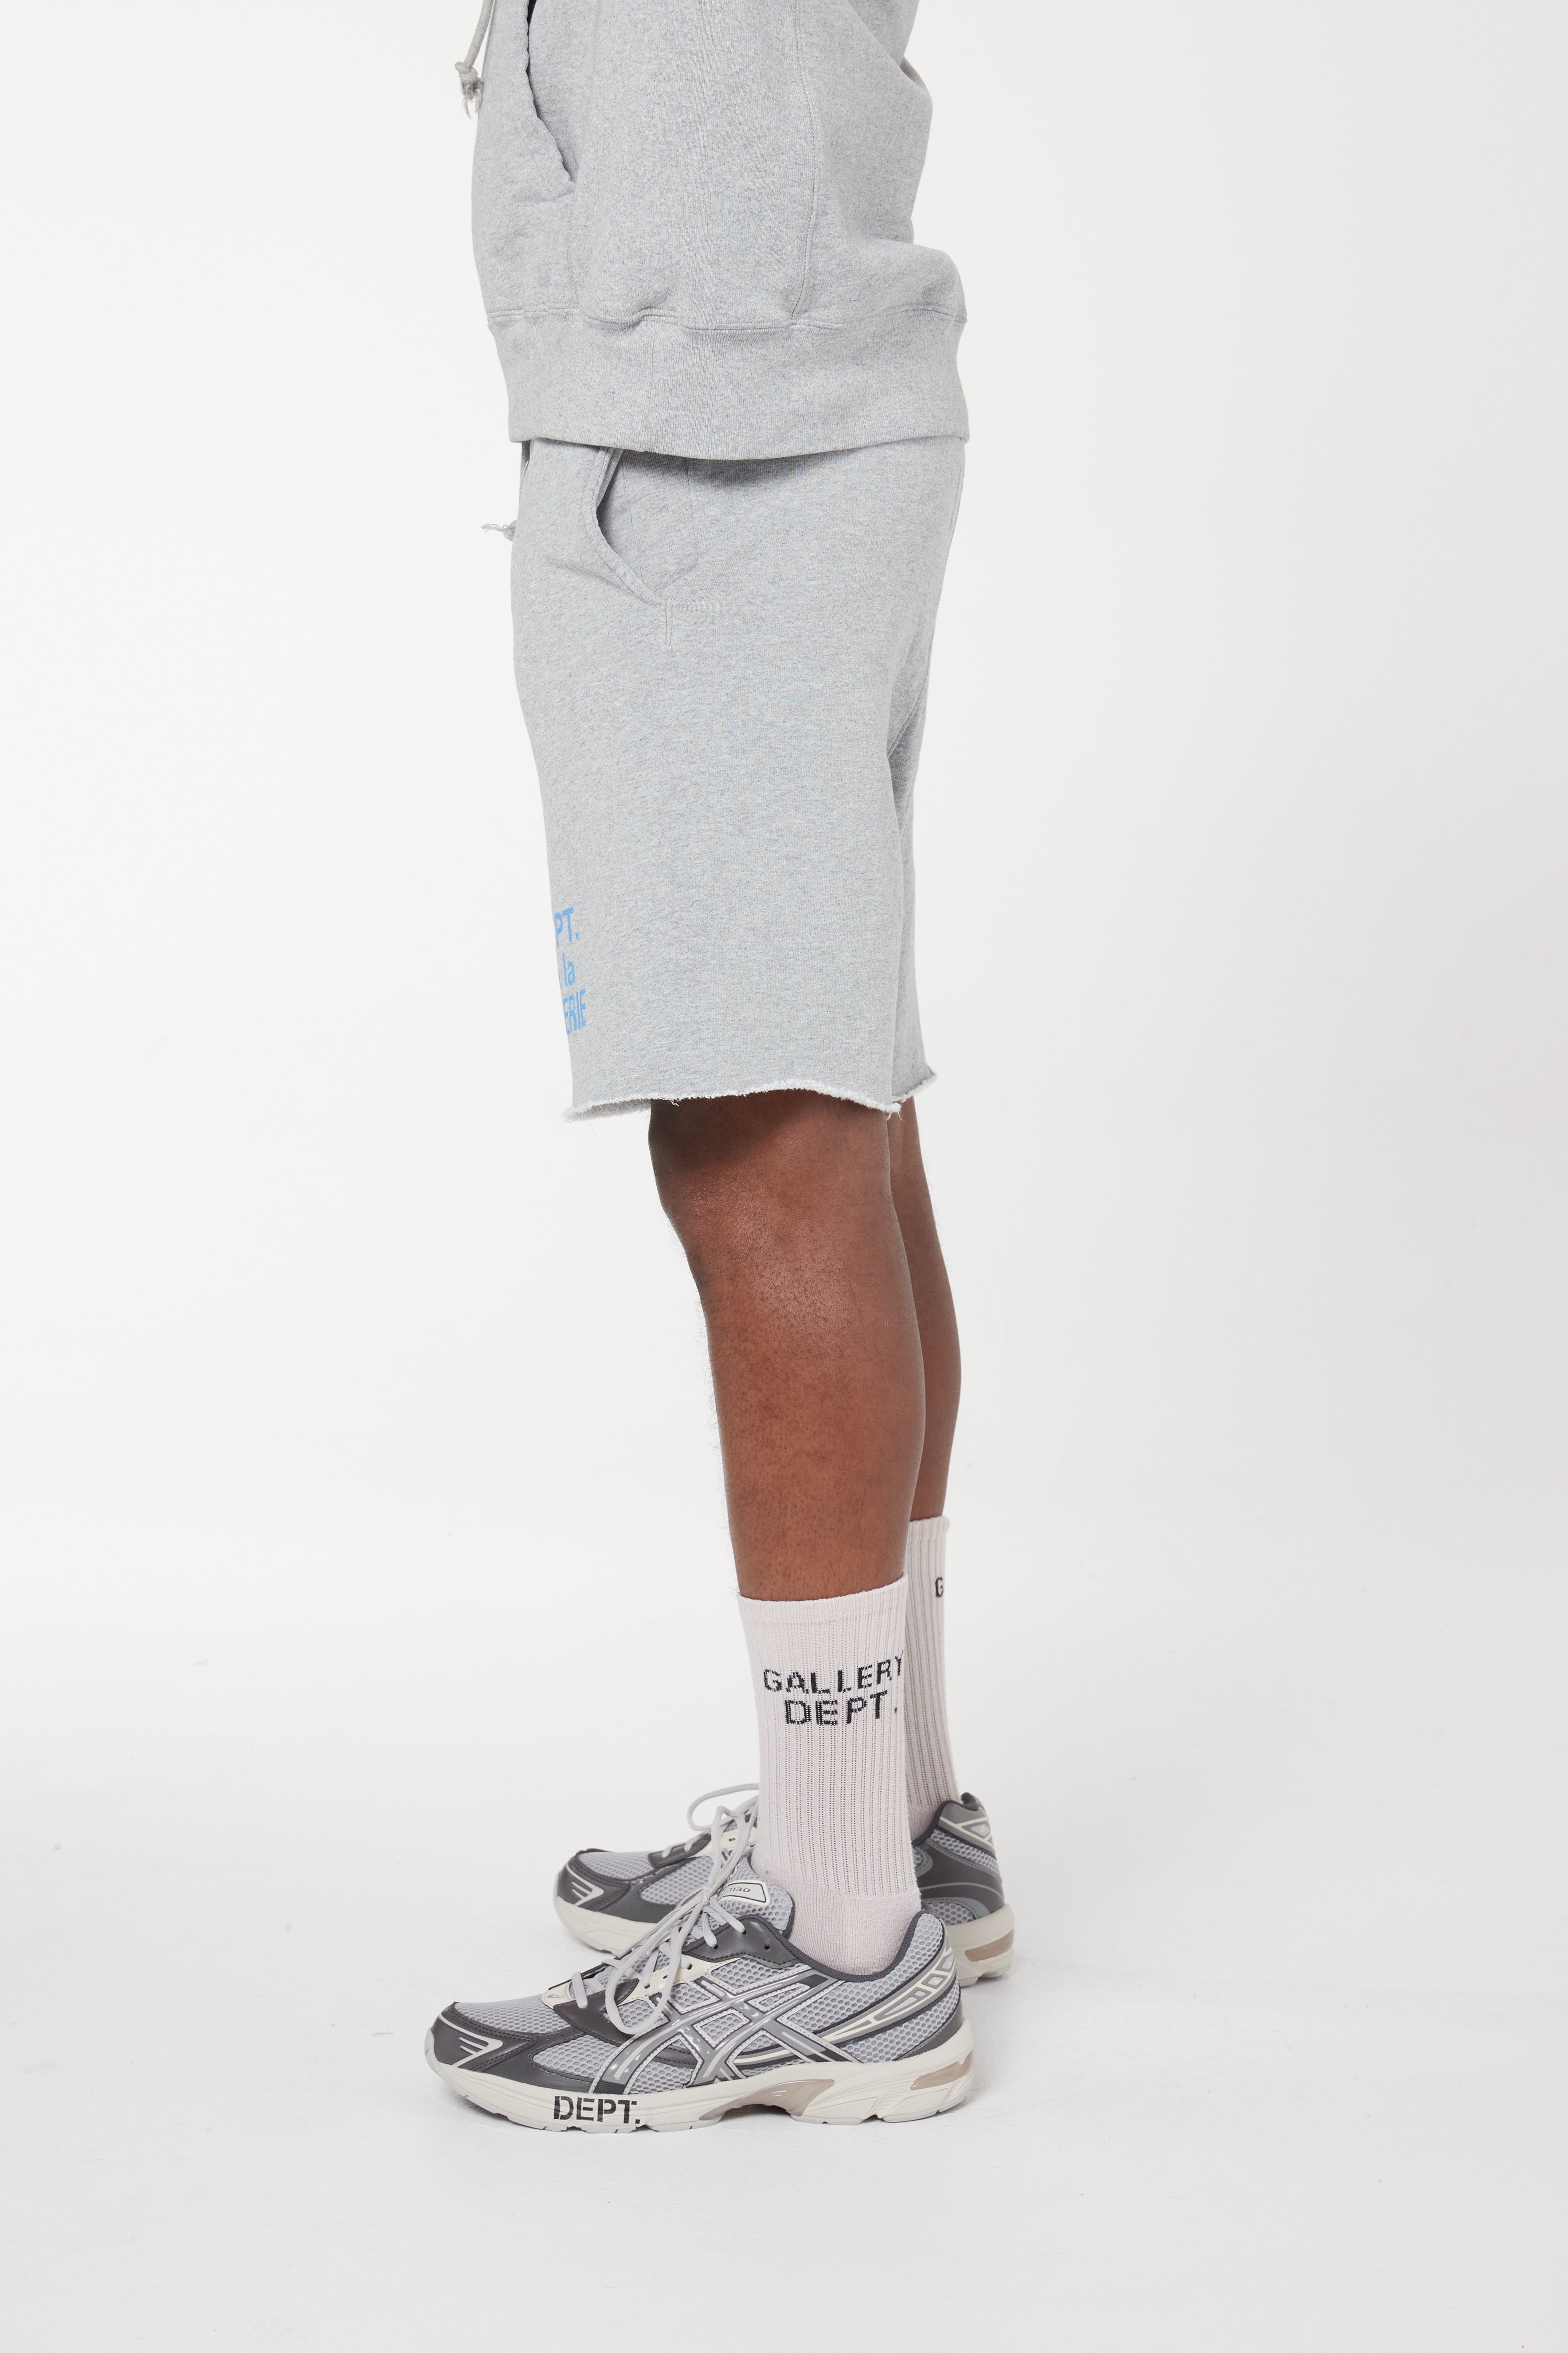 Gallery Dept. French Logo Sweat Shorts Heather Grey Men's - SS23 - US